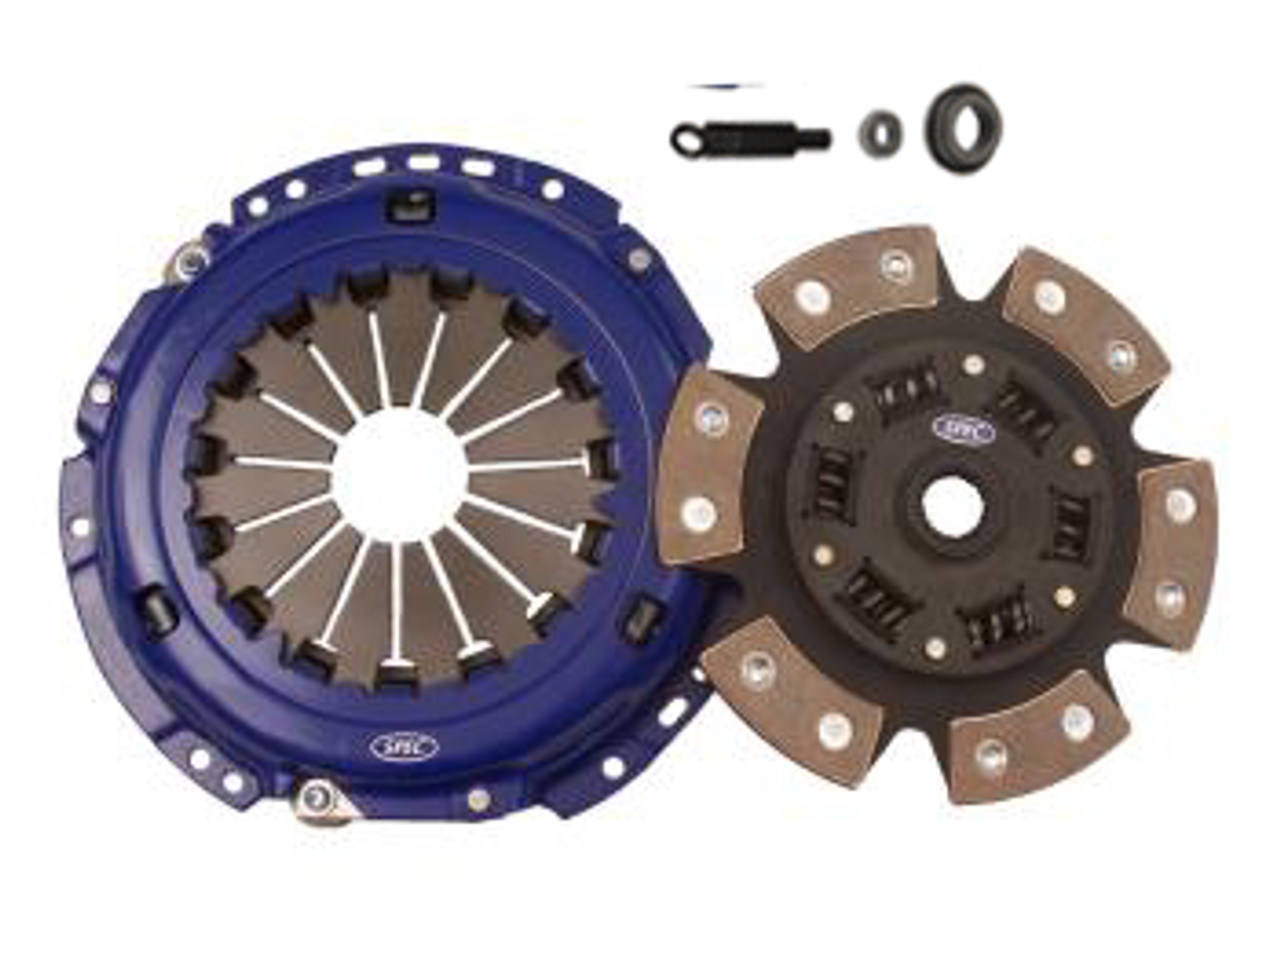 SPEC 3 Clutch | Save on Quality Aftermarket Car Parts